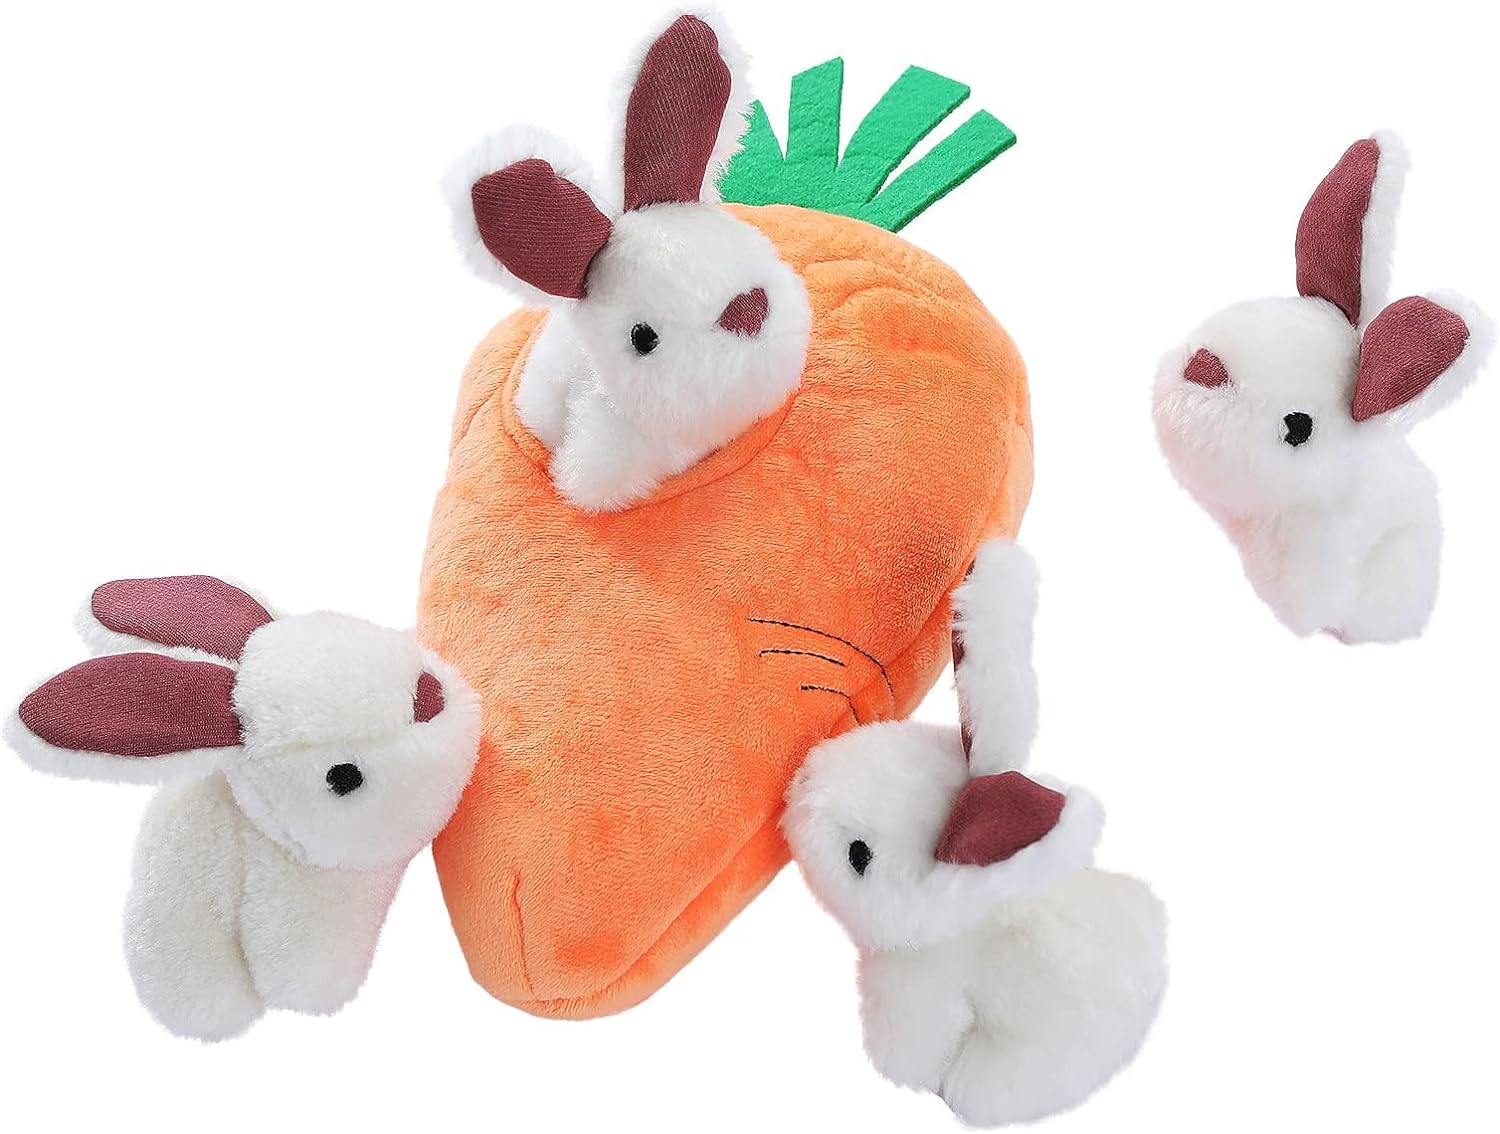 Amazon Basics Hide and Seek Squeaky Dog Plush Toy, Rabbit and Carrot, Orange and white, 5 Pack